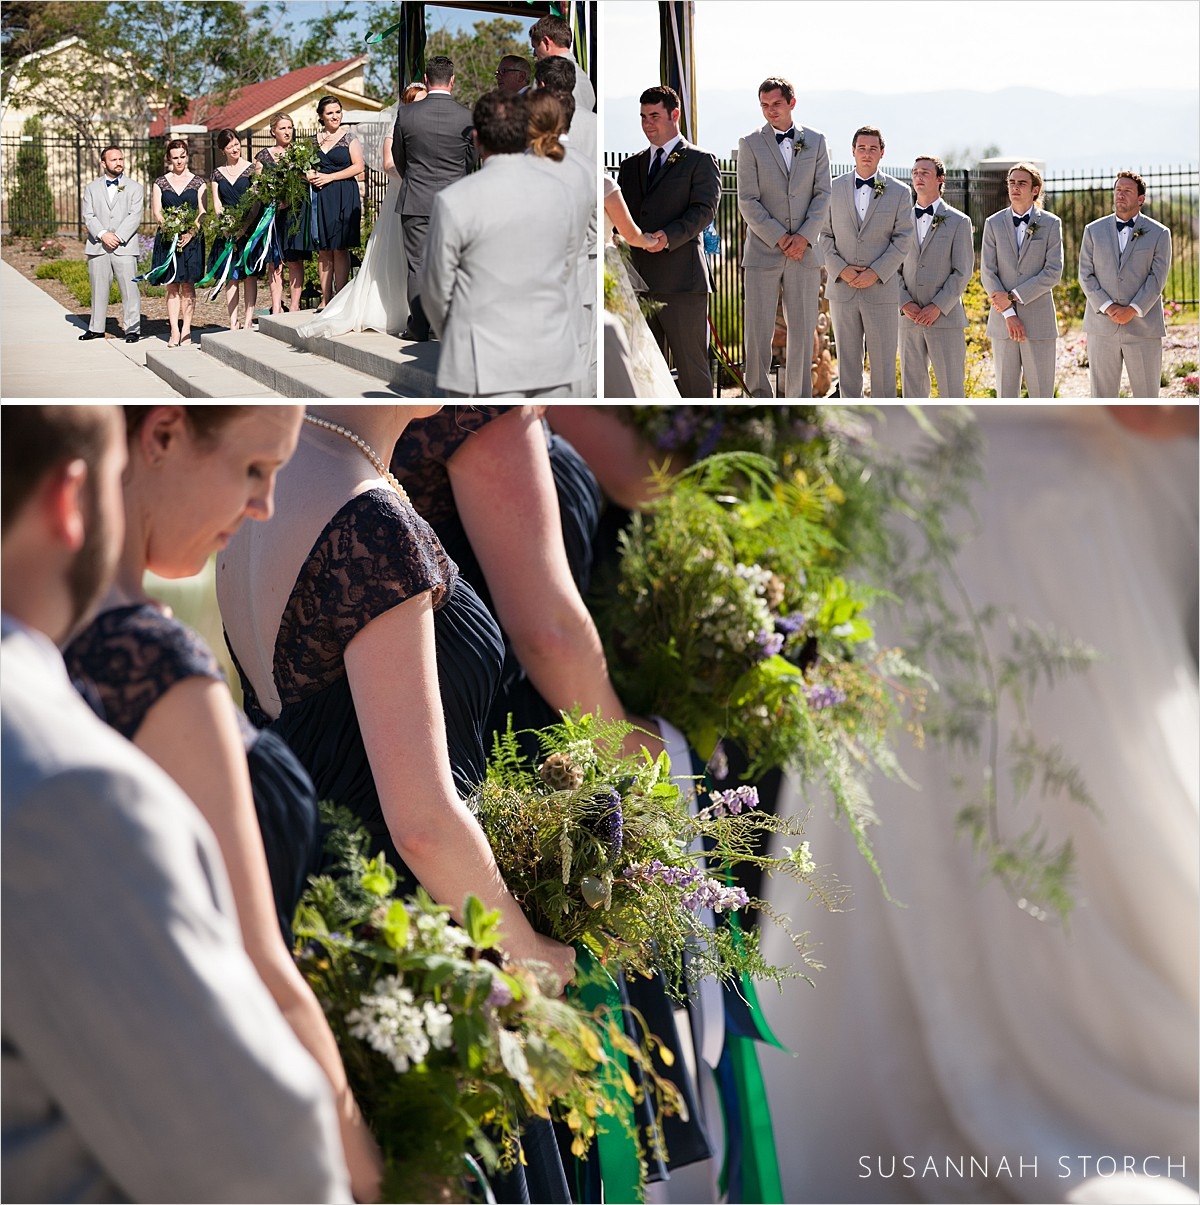 three images of an outdoor wedding ceremony